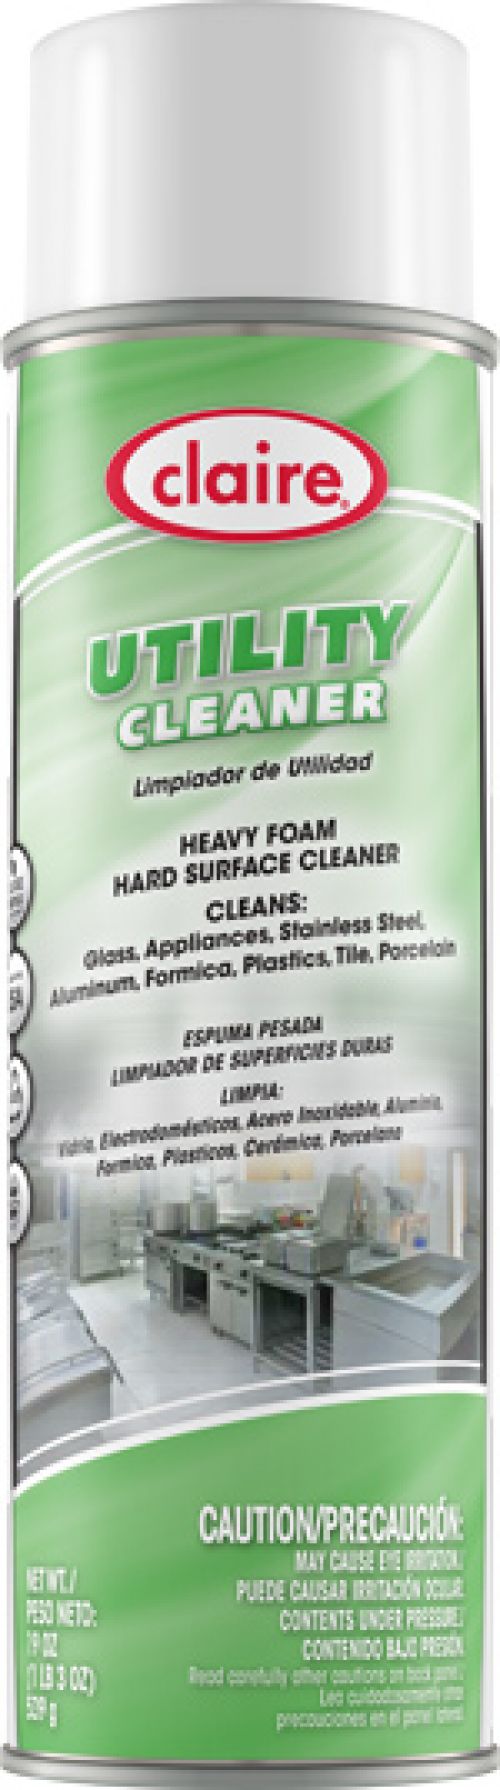 Utility Cleaner